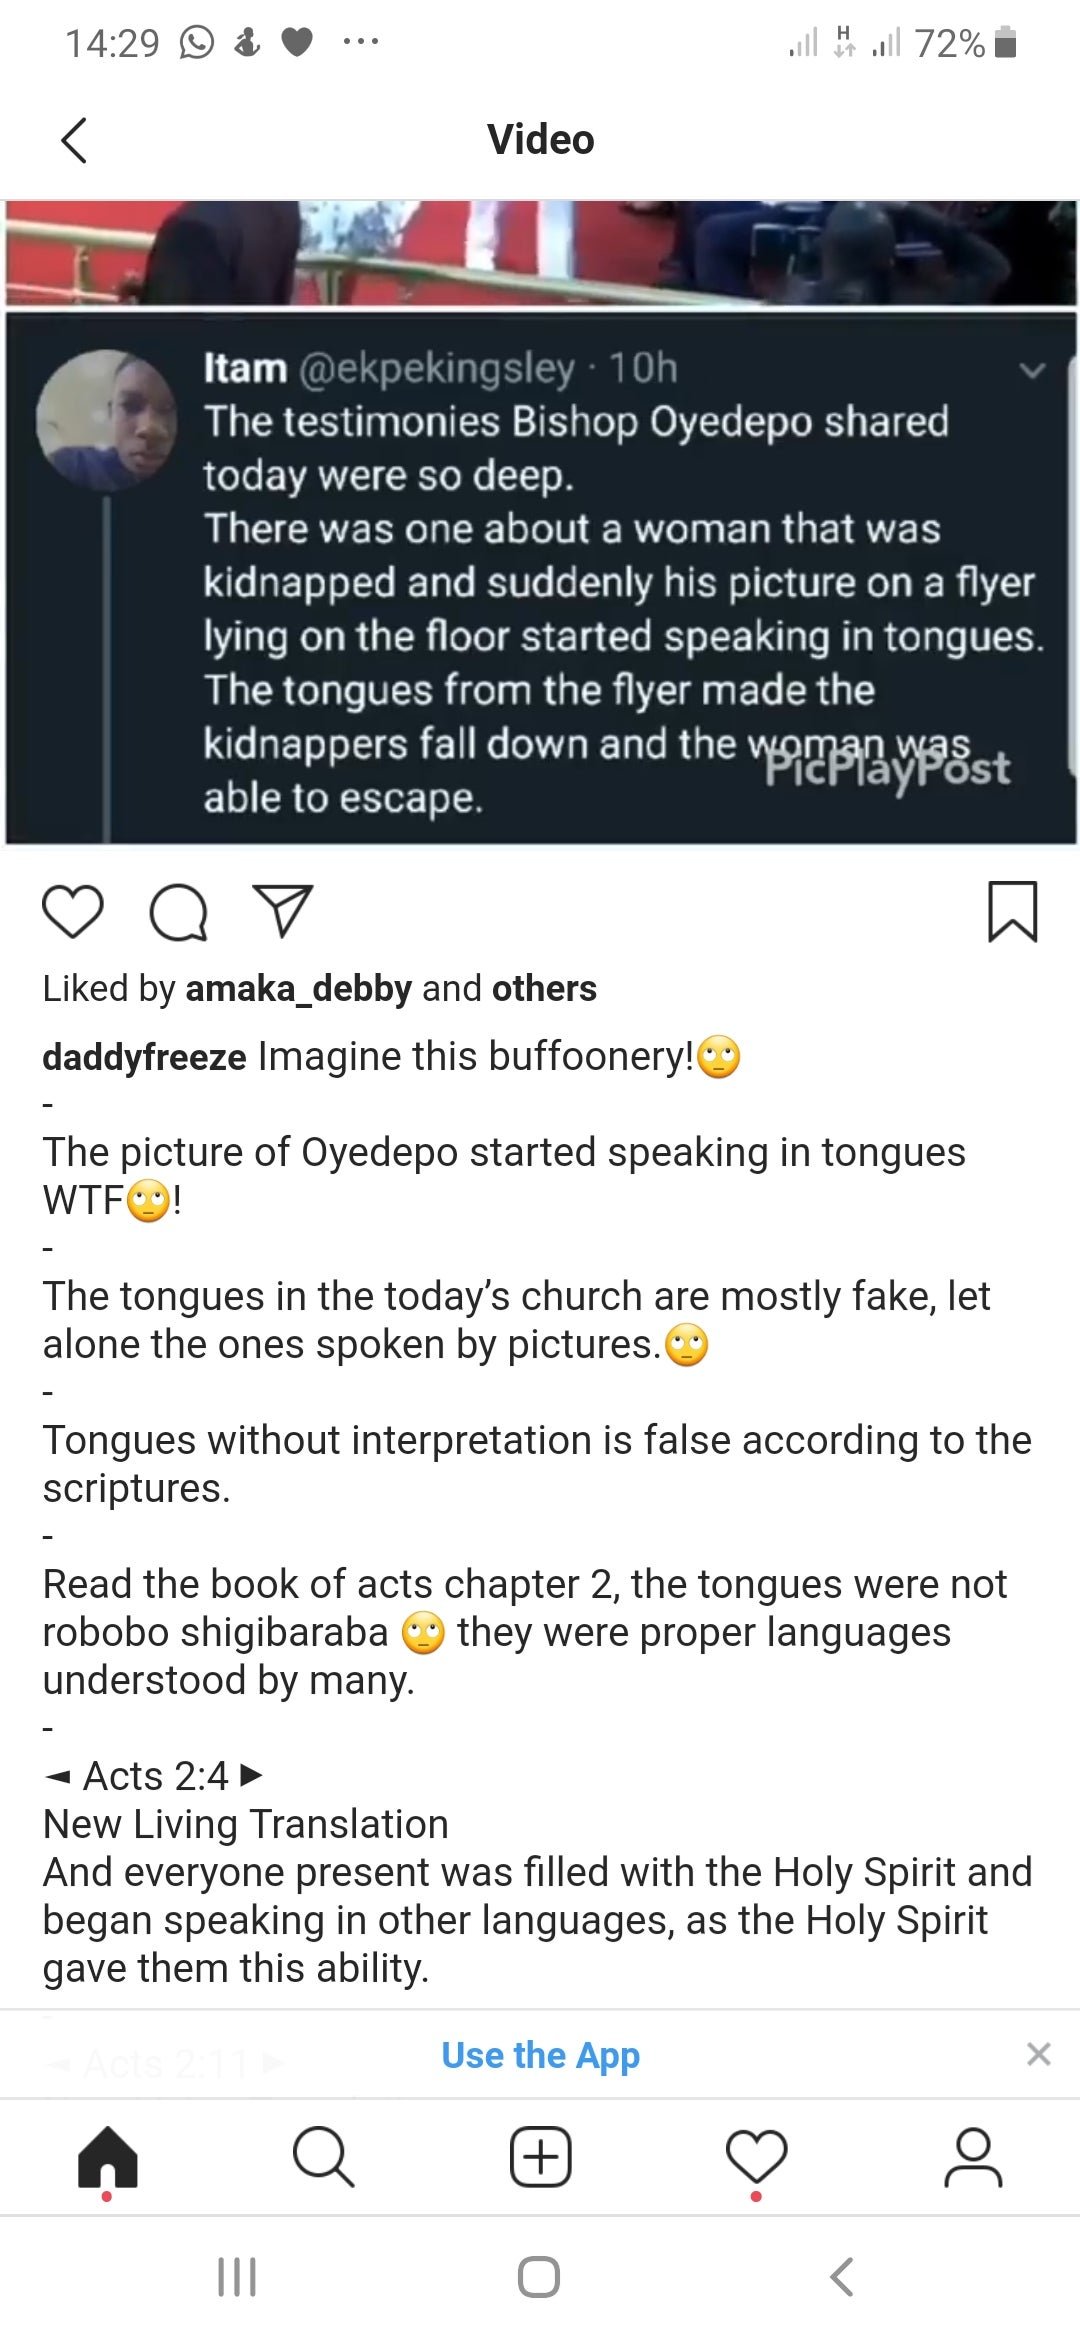 "Tongues In Most Churches Today Are Fake"- Daddy Freeze